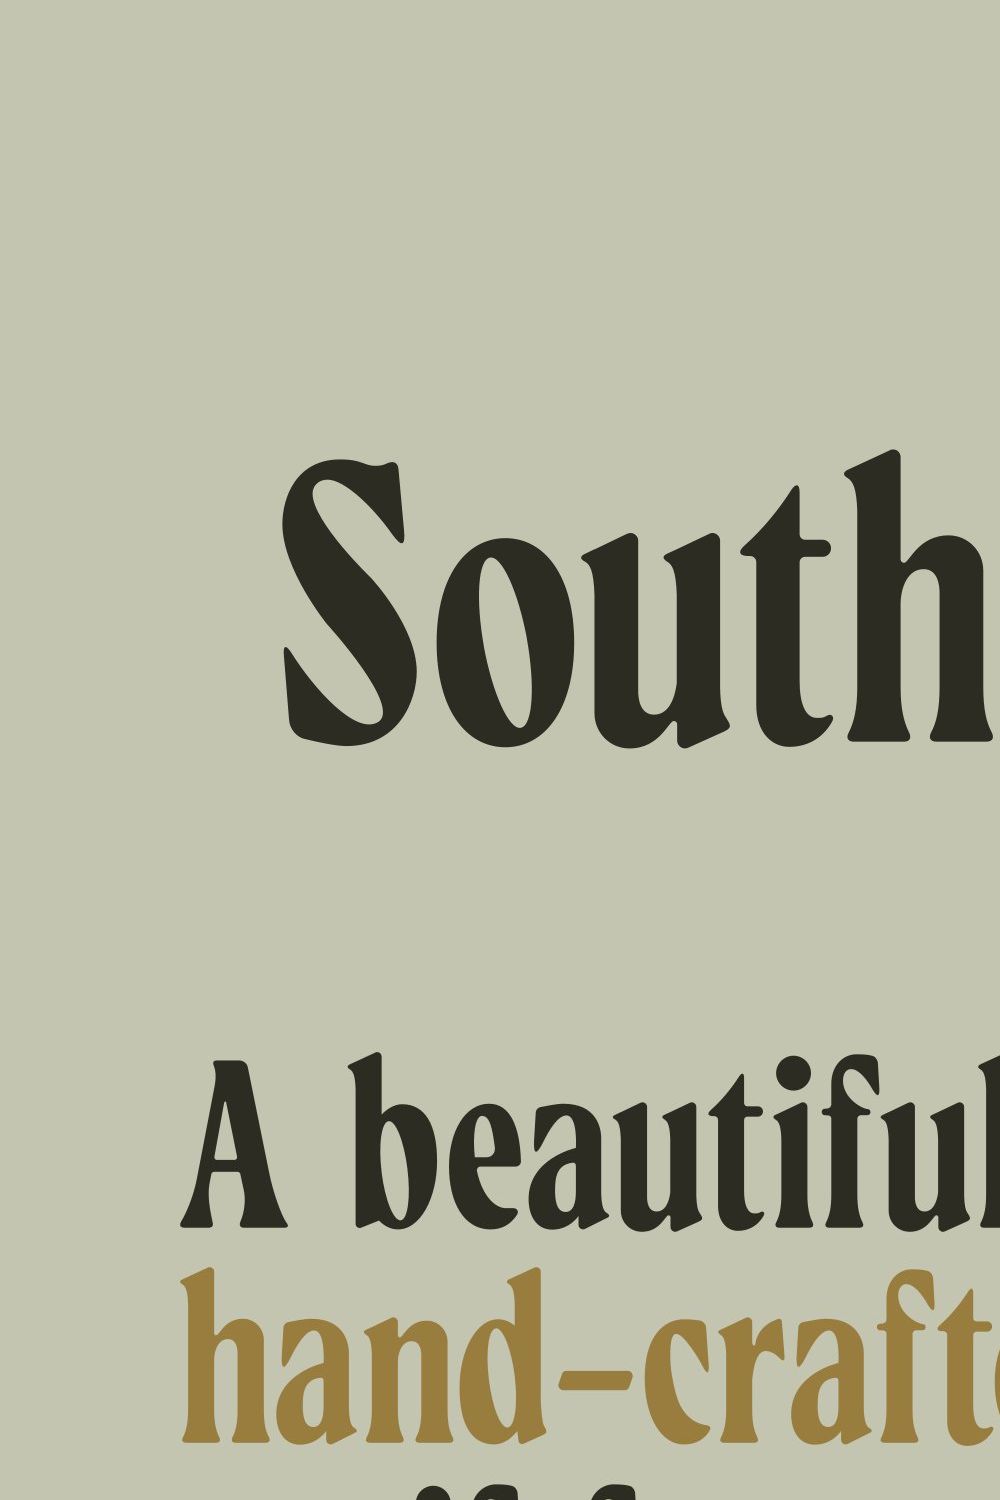 Southport pinterest preview image.